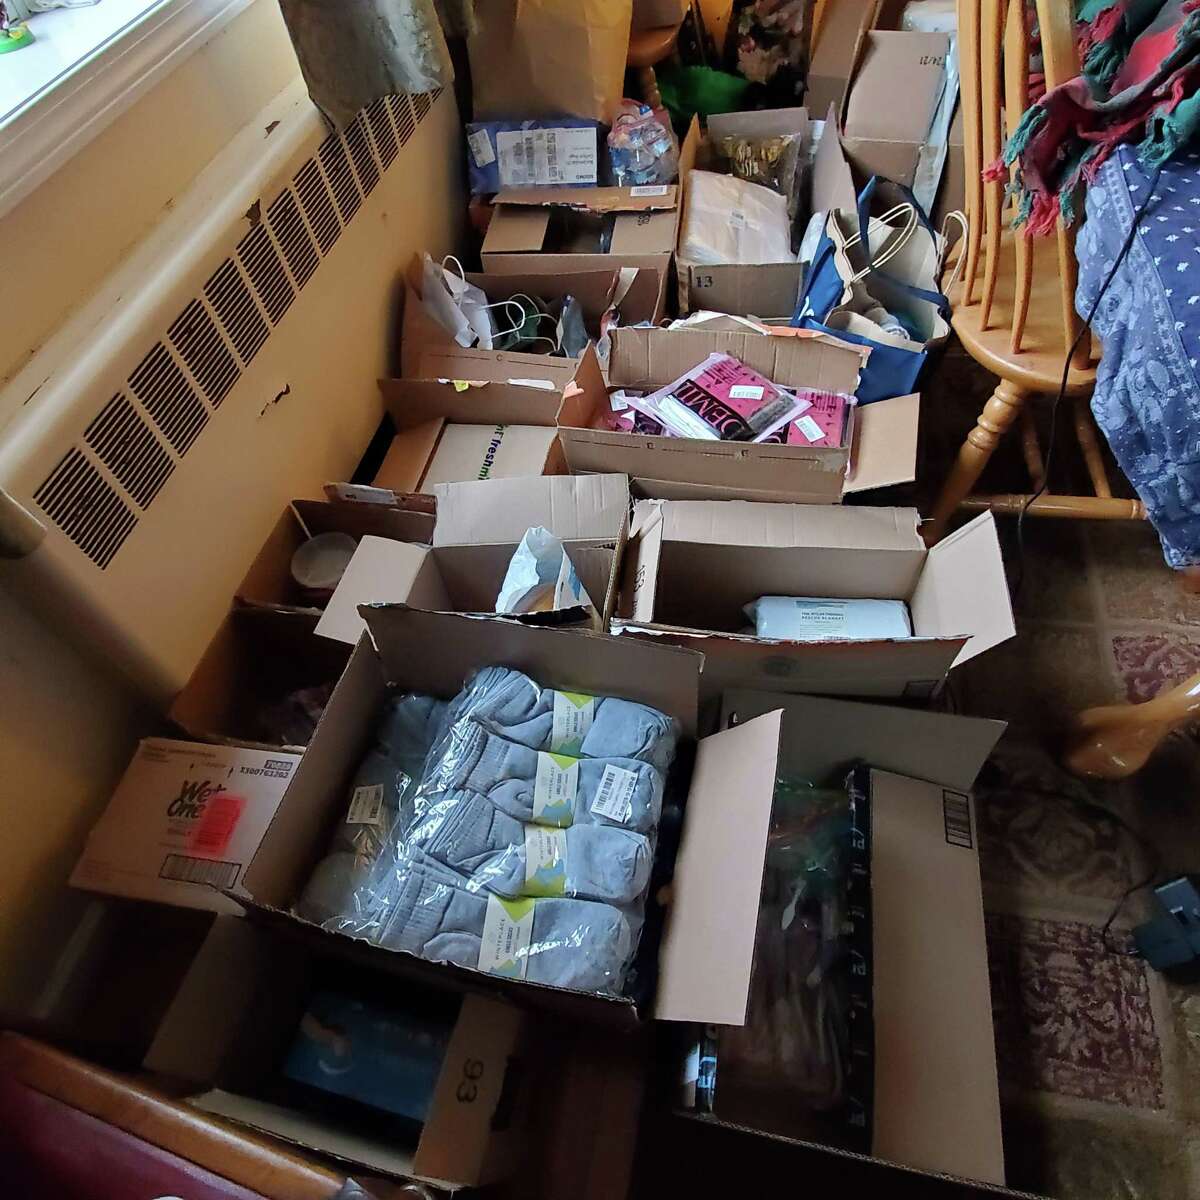 Michelle Cotton keeps on receiving items from her Amazon List to benefit the homeless population.